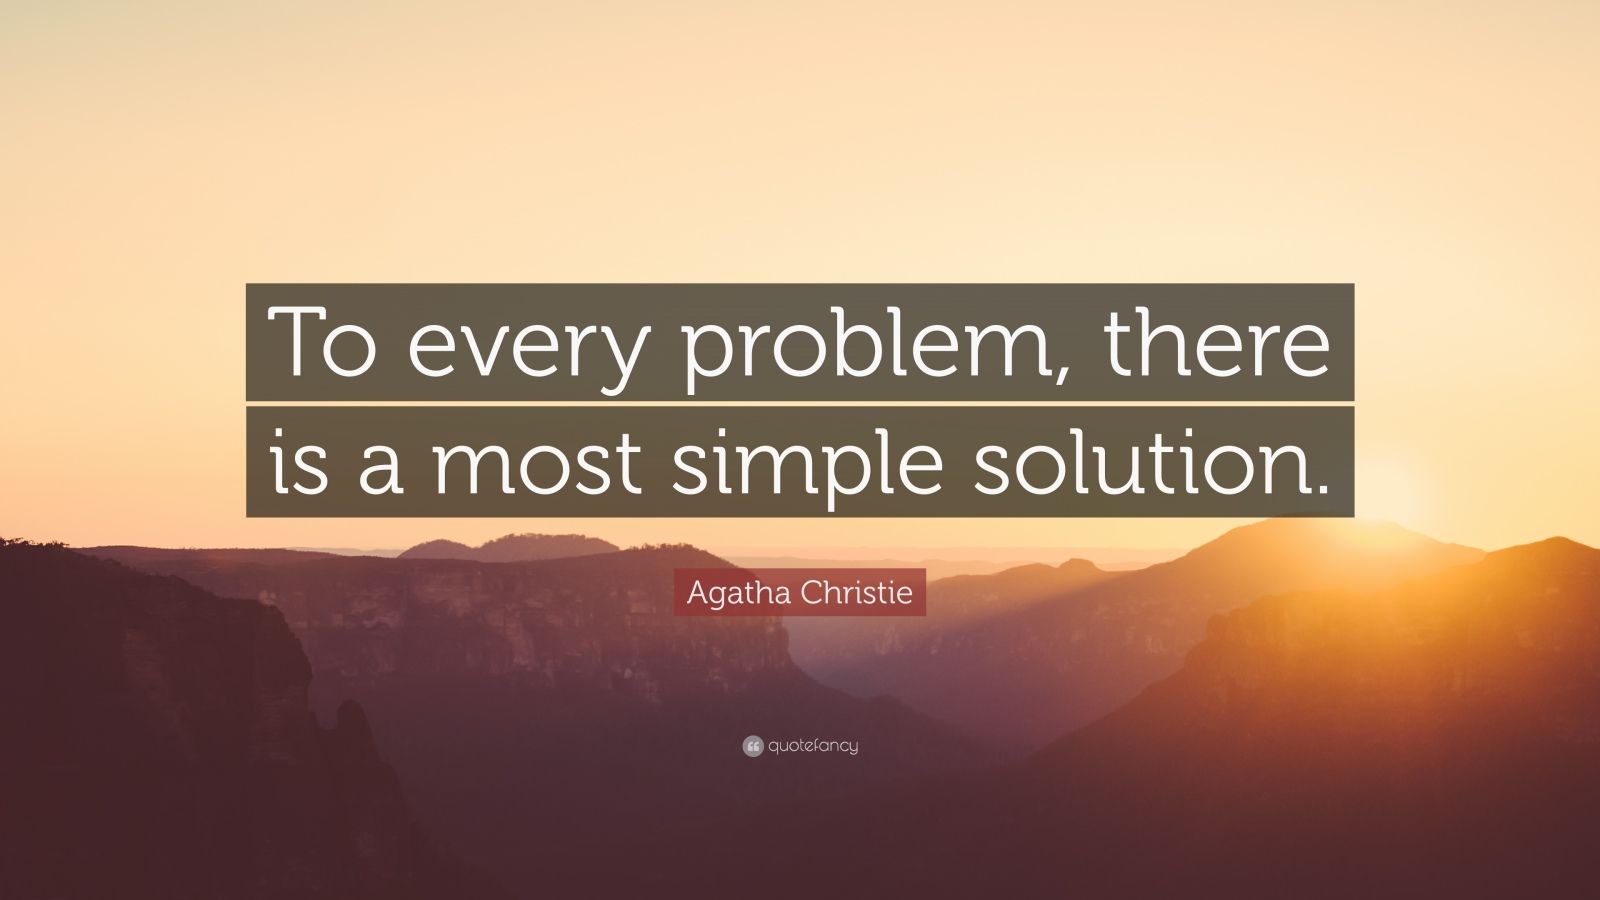 Agatha Christie Quote “To every problem, there is a most simple solution.”